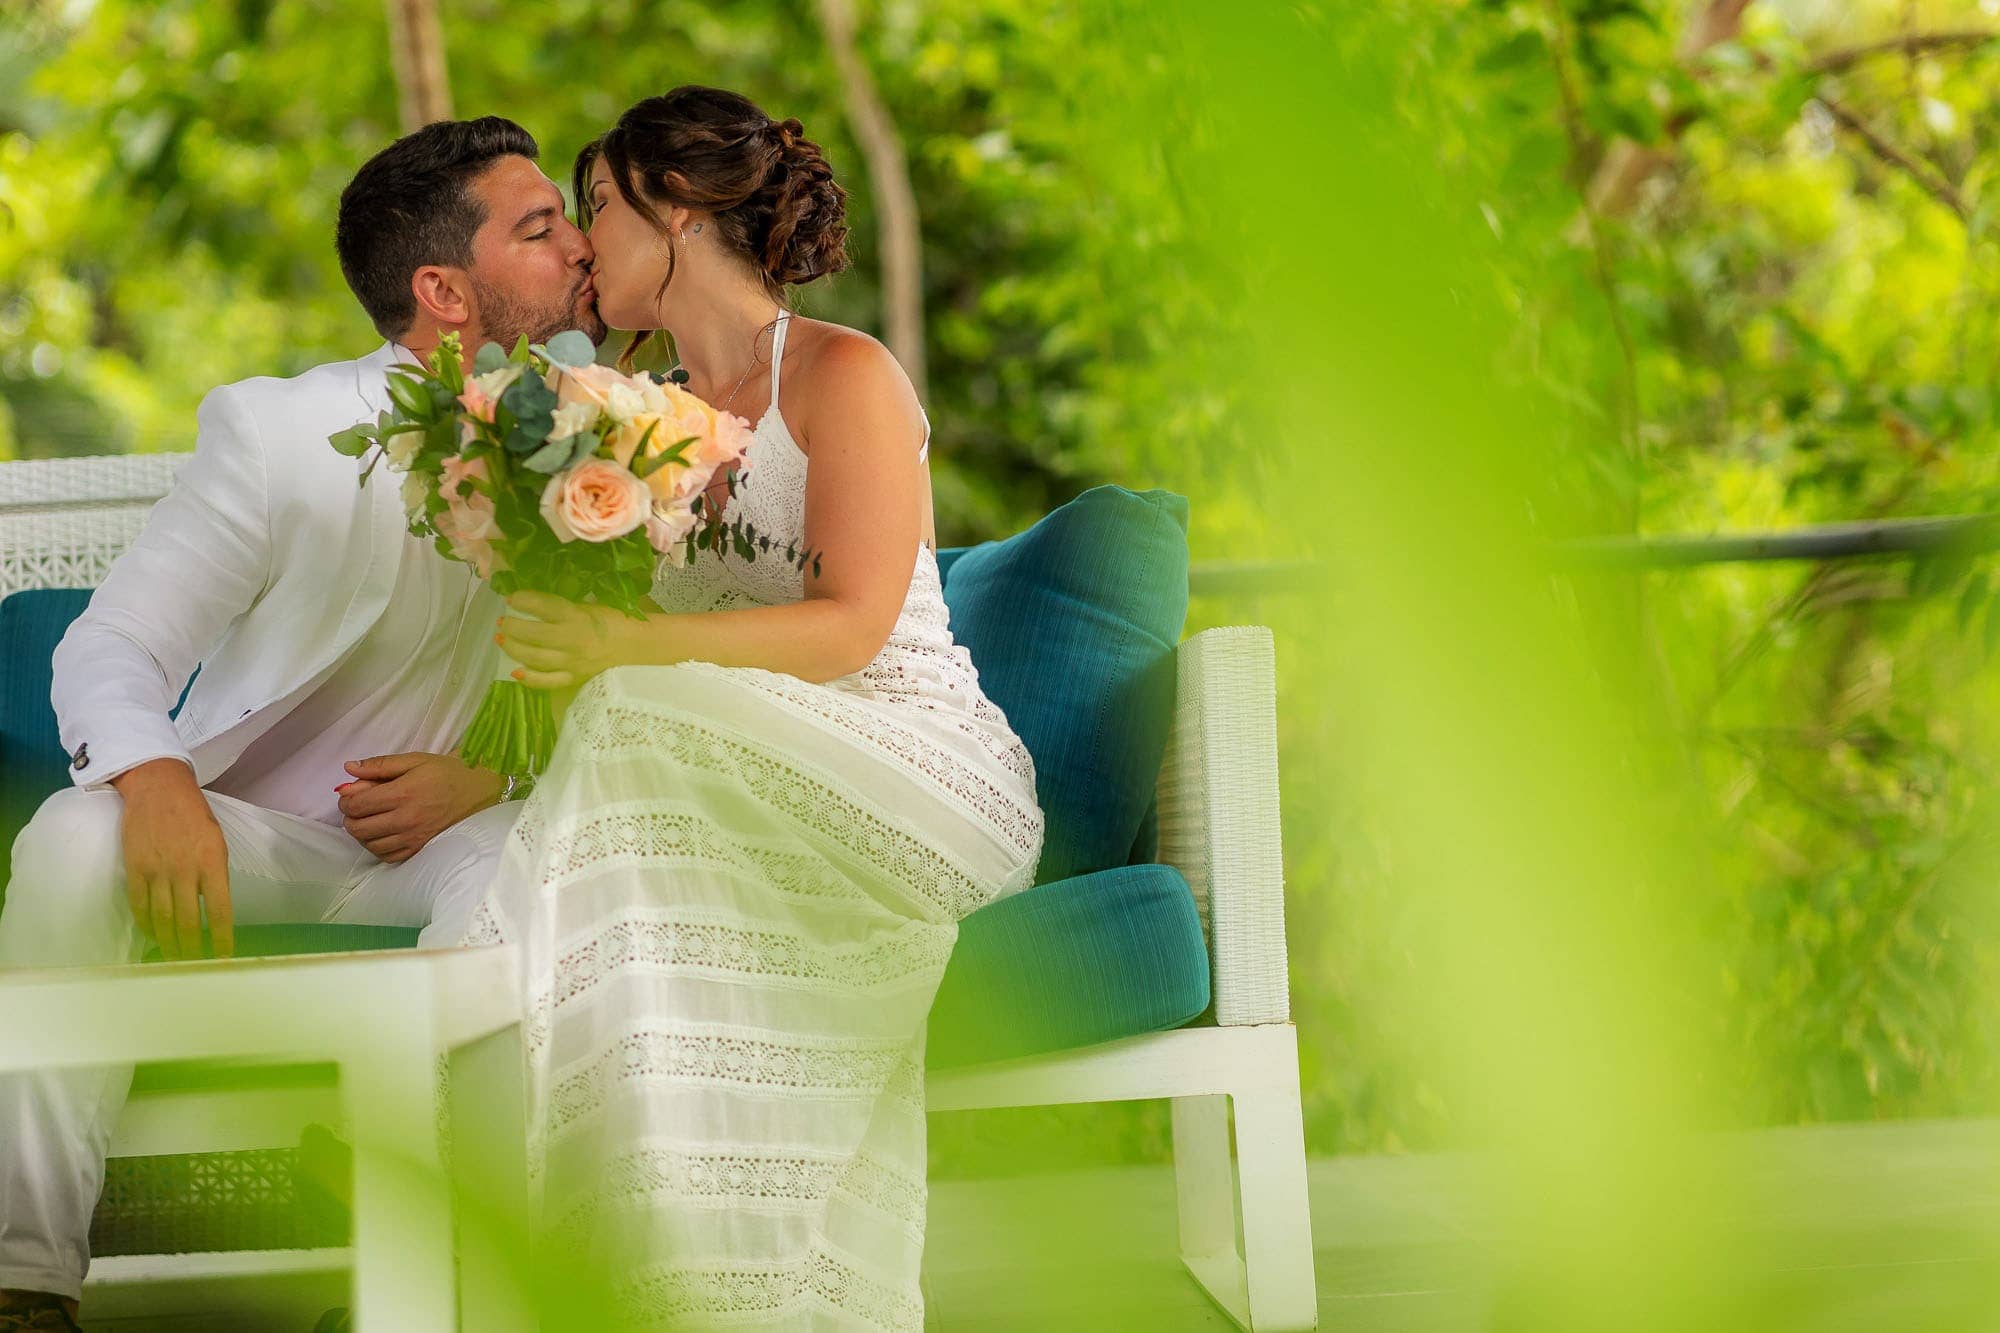 The bride and groom sneak a kiss on a bench